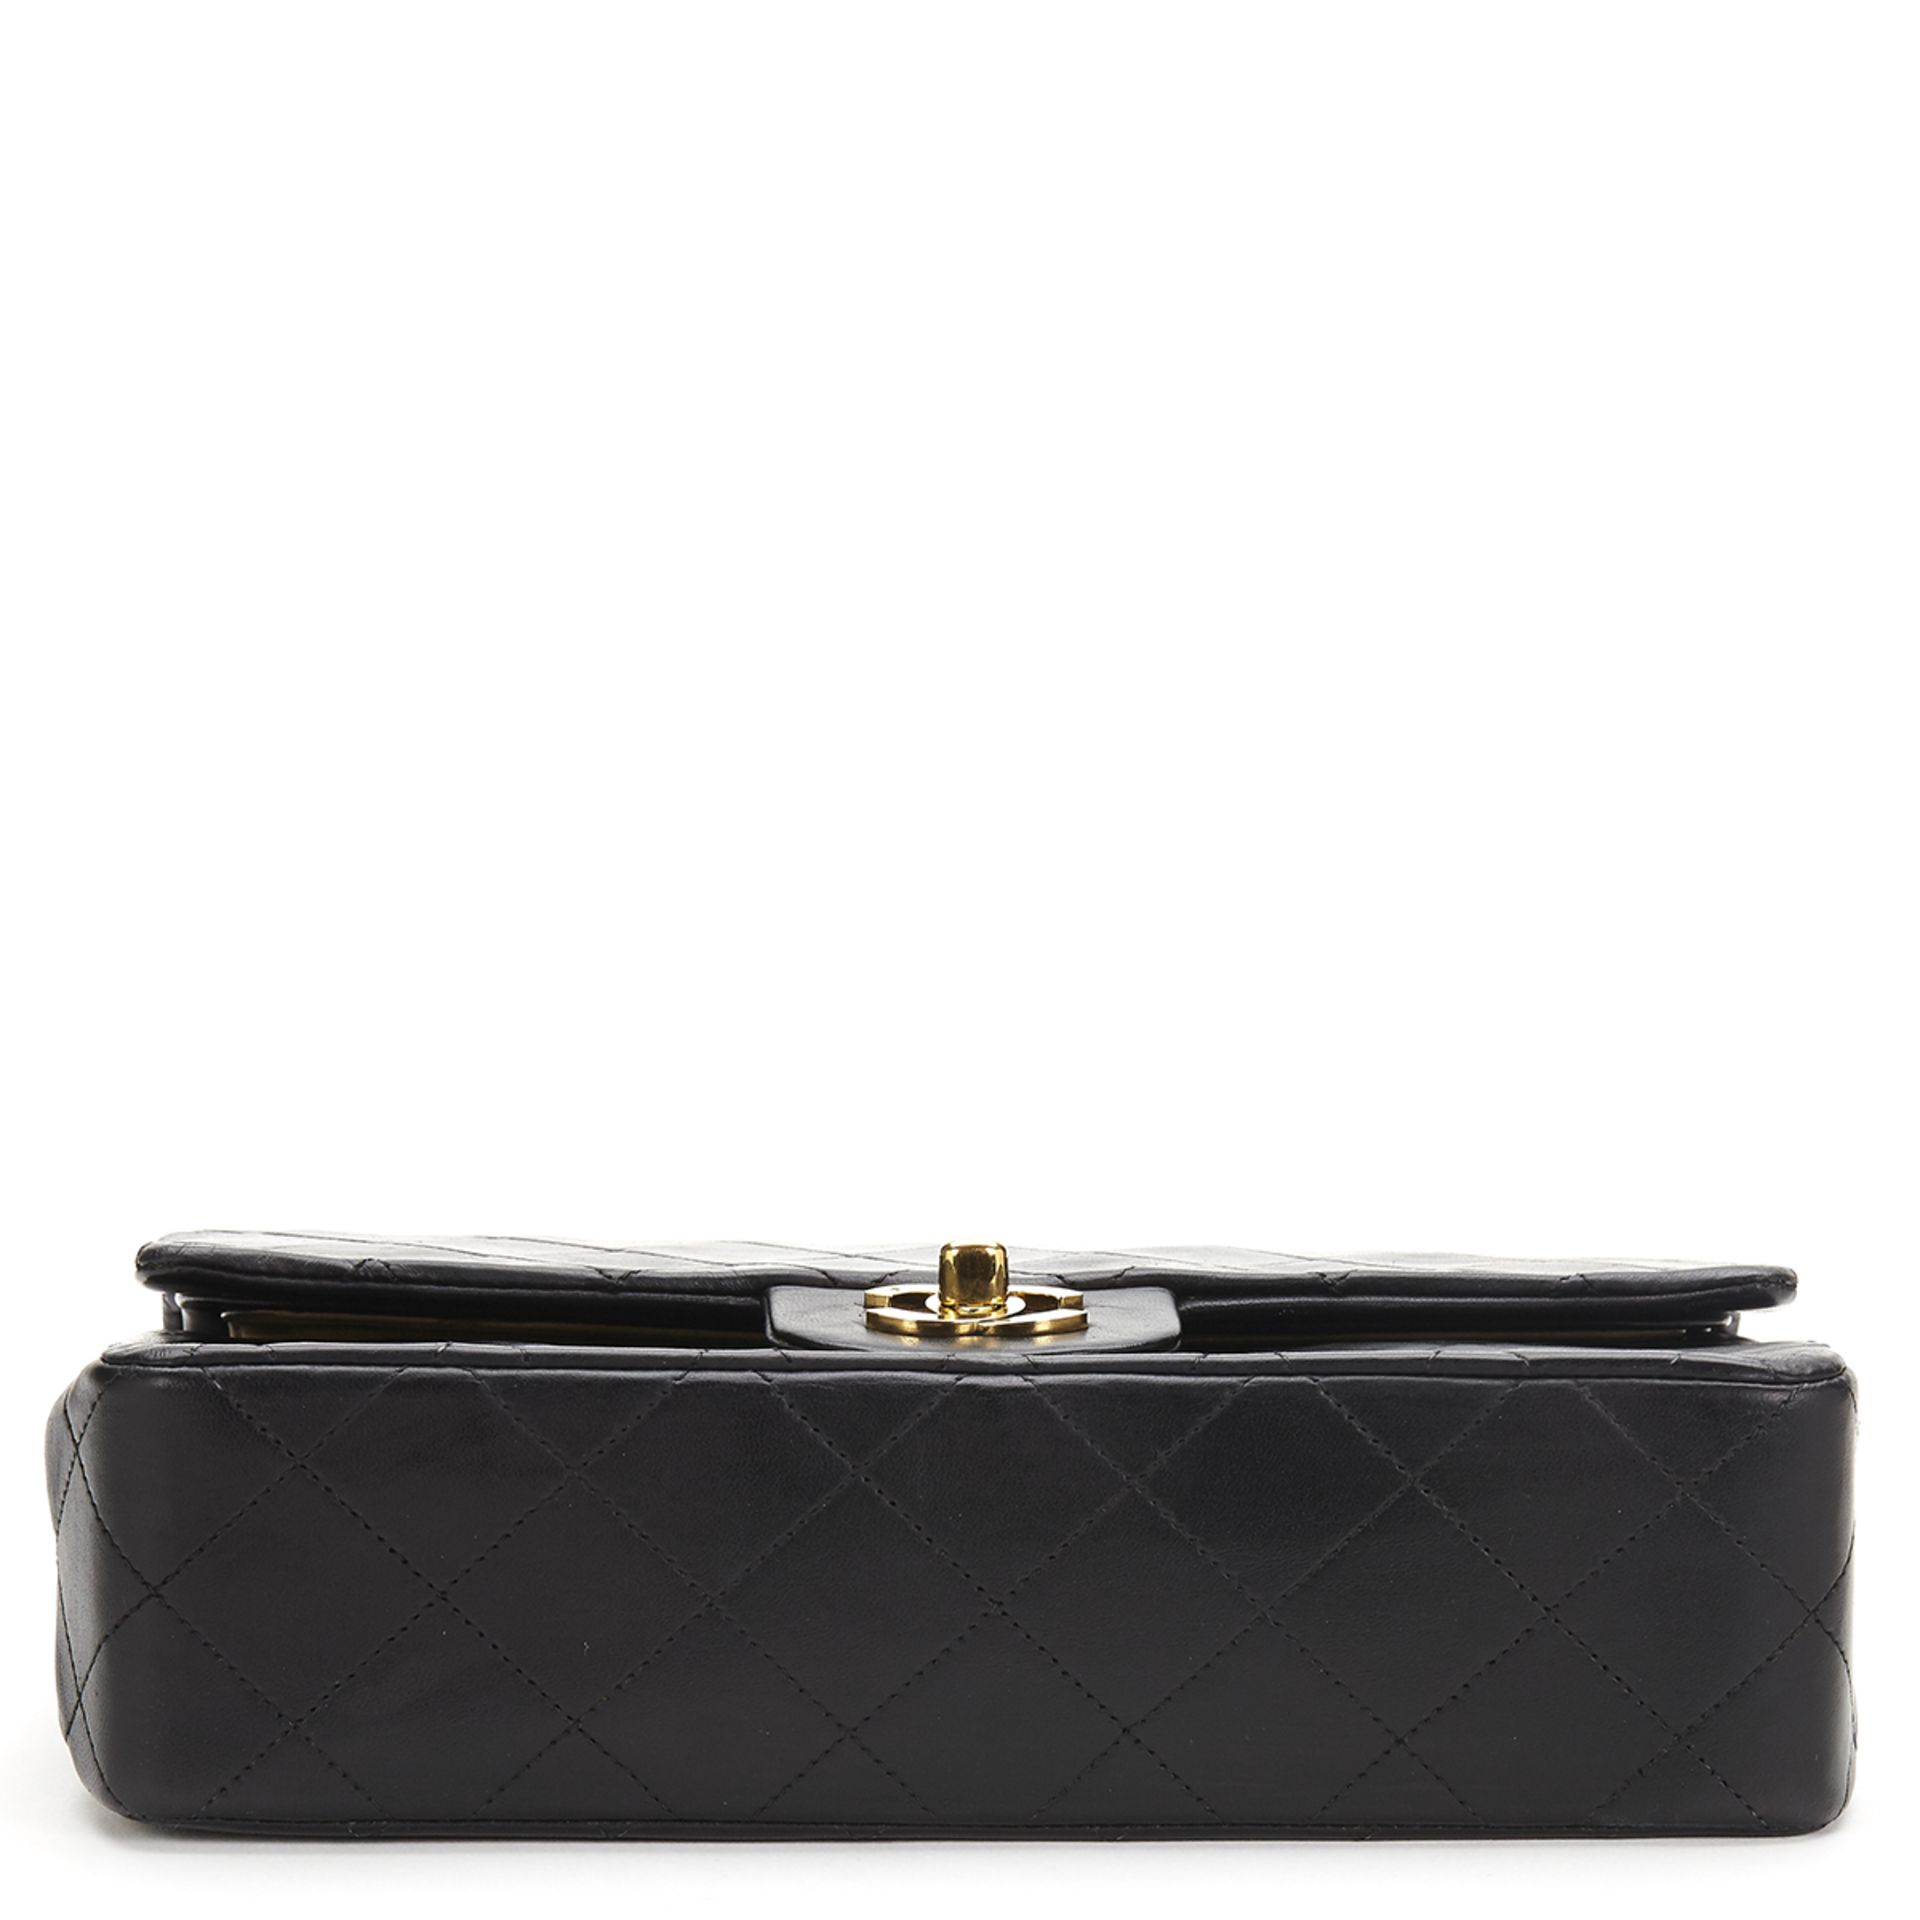 Chanel, Small Classic Double Flap Bag - Image 5 of 9